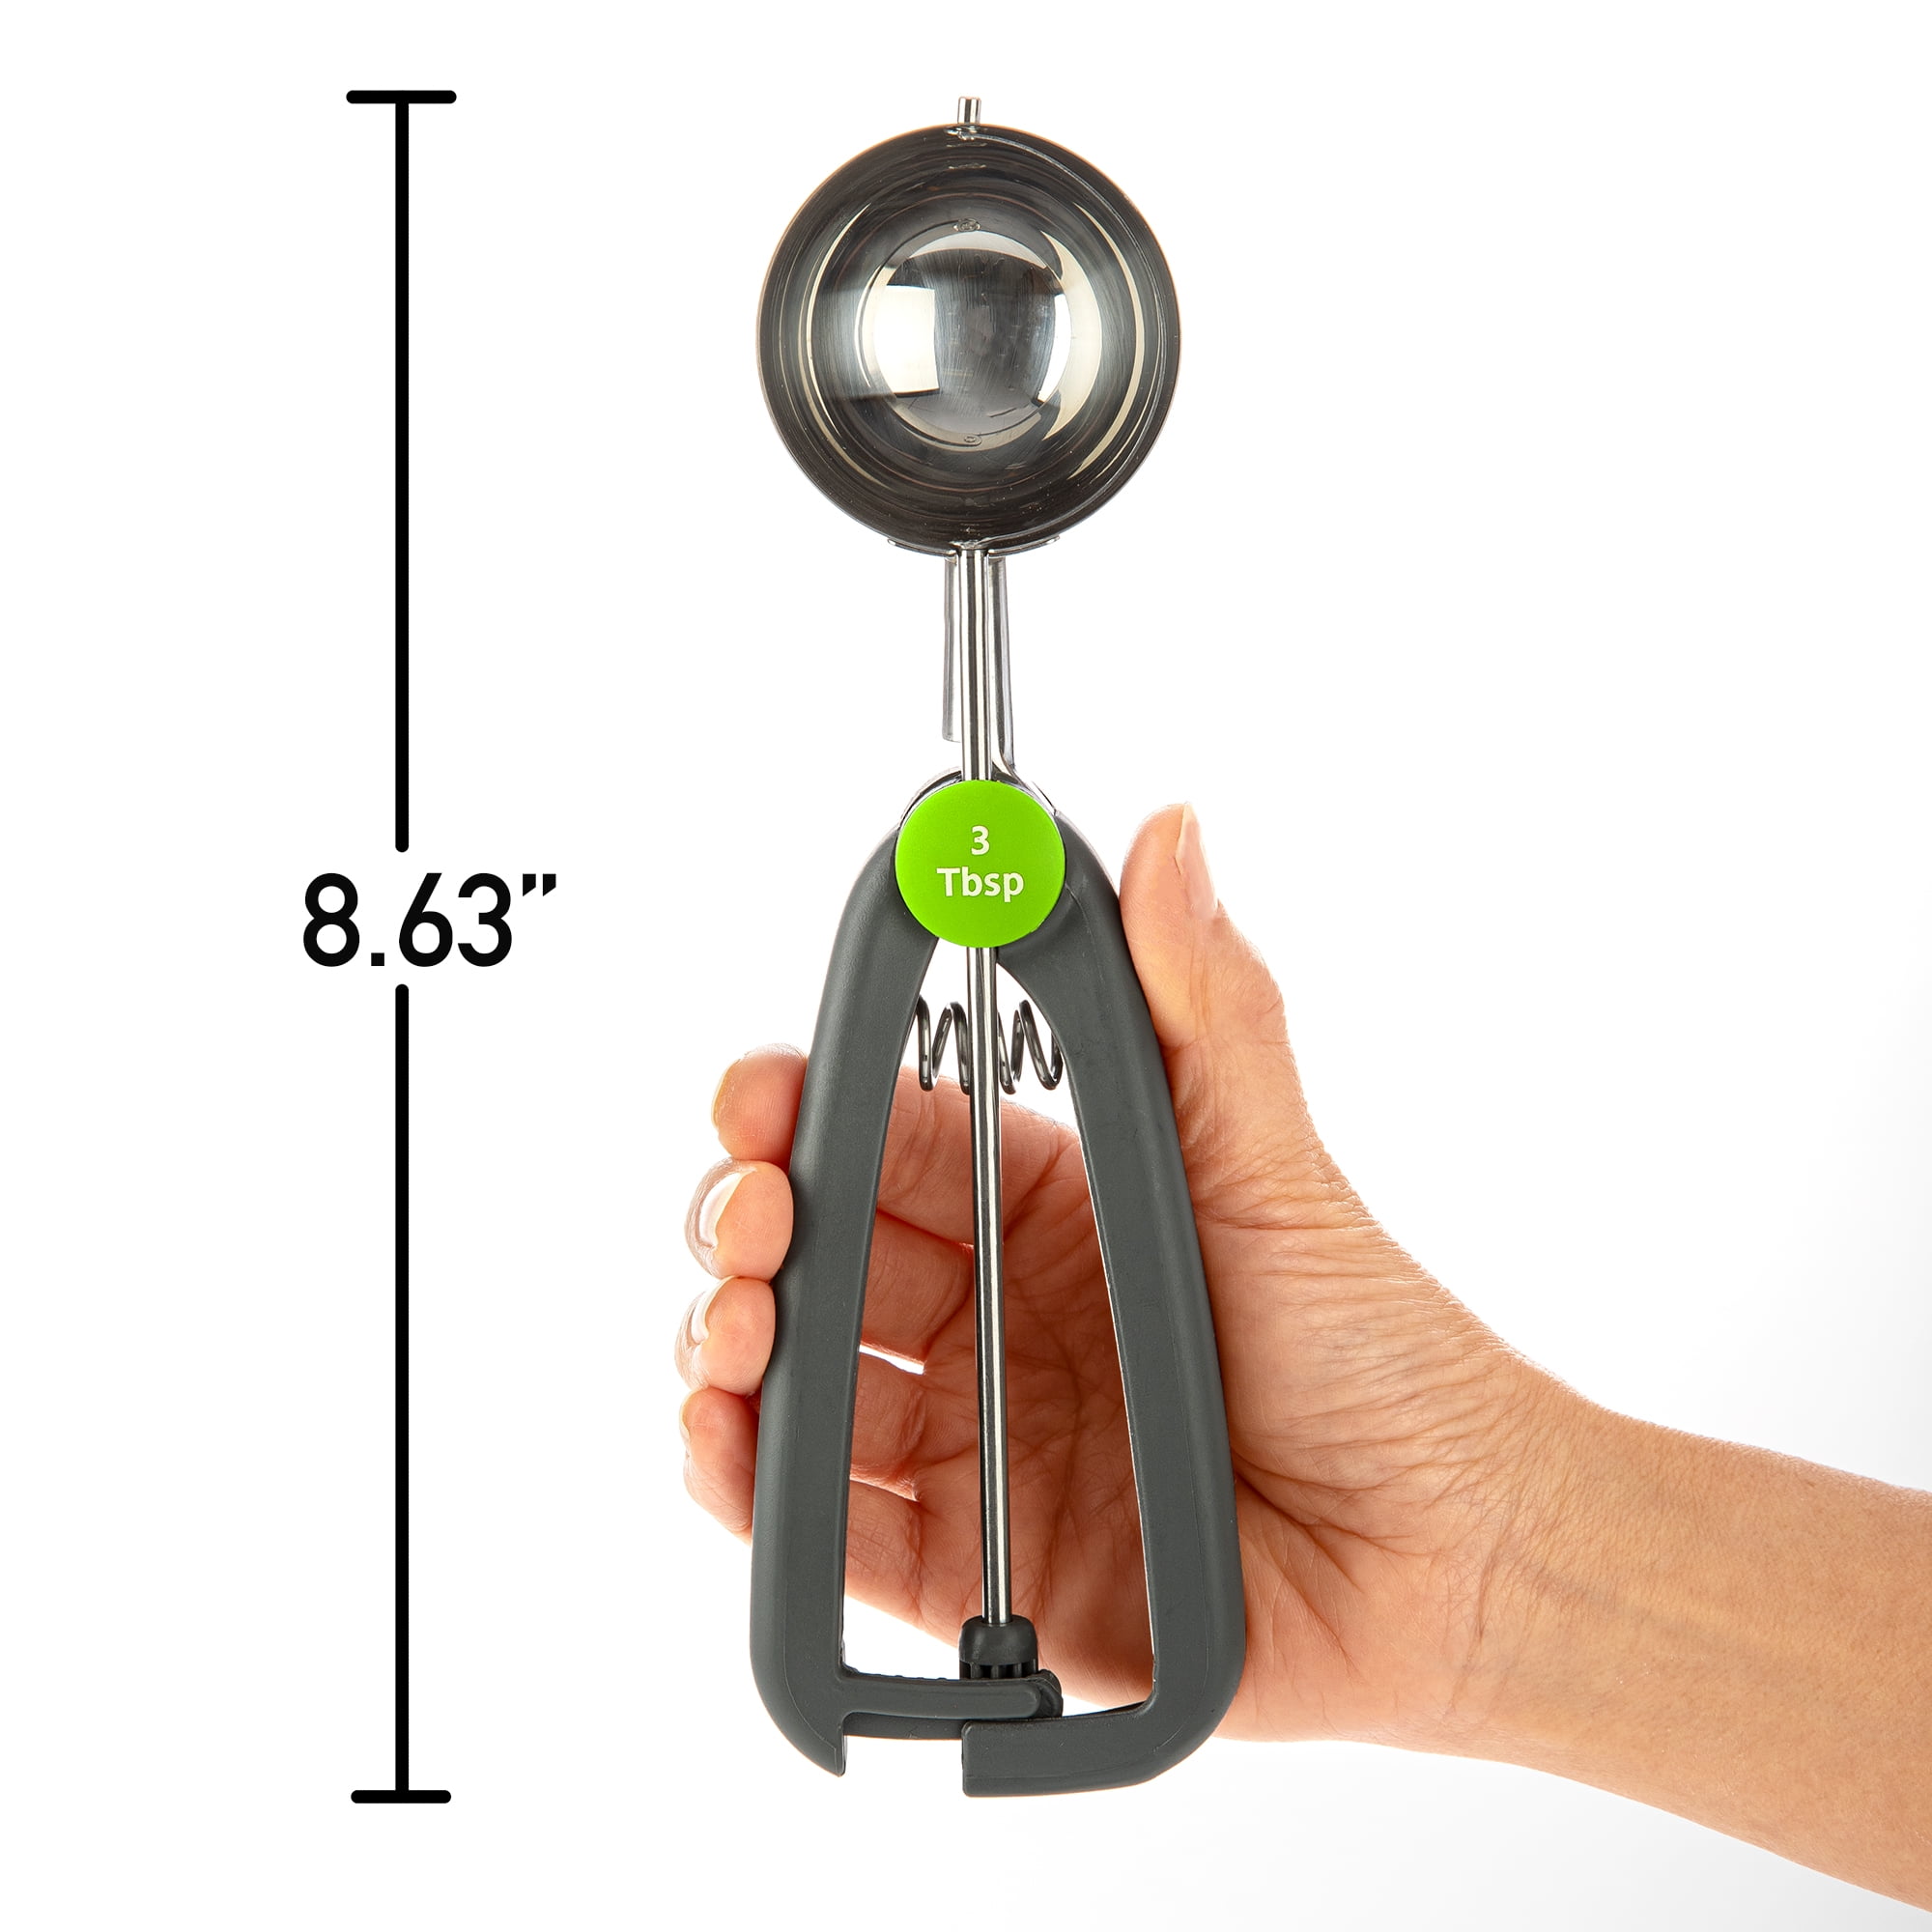  Cookie Scoop 1 Tbsp, TJ POP Professional Stainless Steel Ice  Cream Scoop 35 mm, Good Soft Grips, Quick Trigger Release: Home & Kitchen